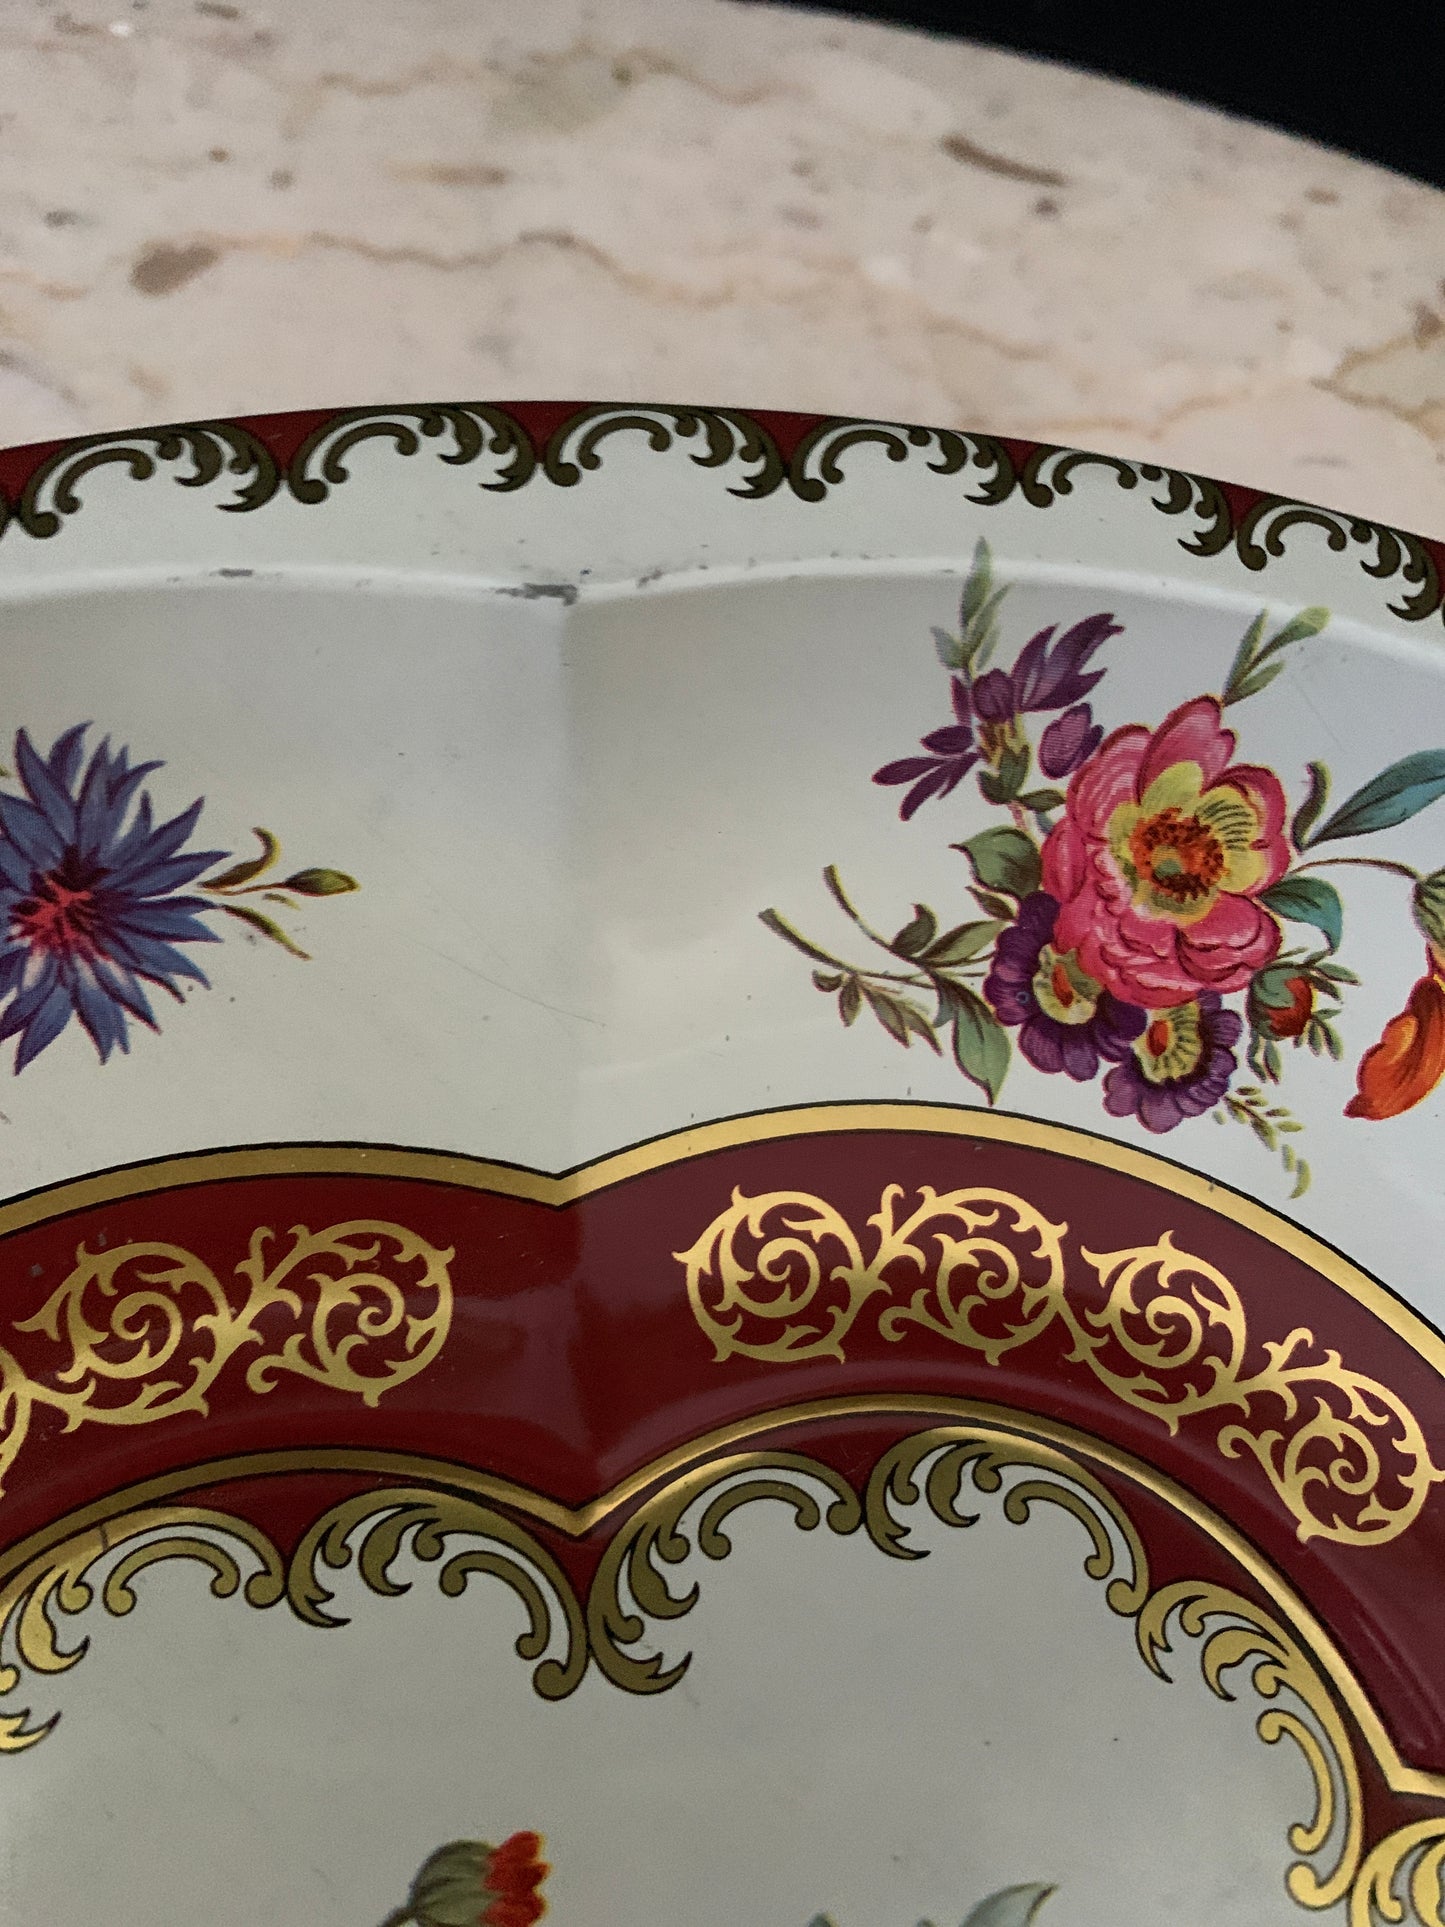 Daher Decorated Ware Tin Bowl Decorative Floral Tray